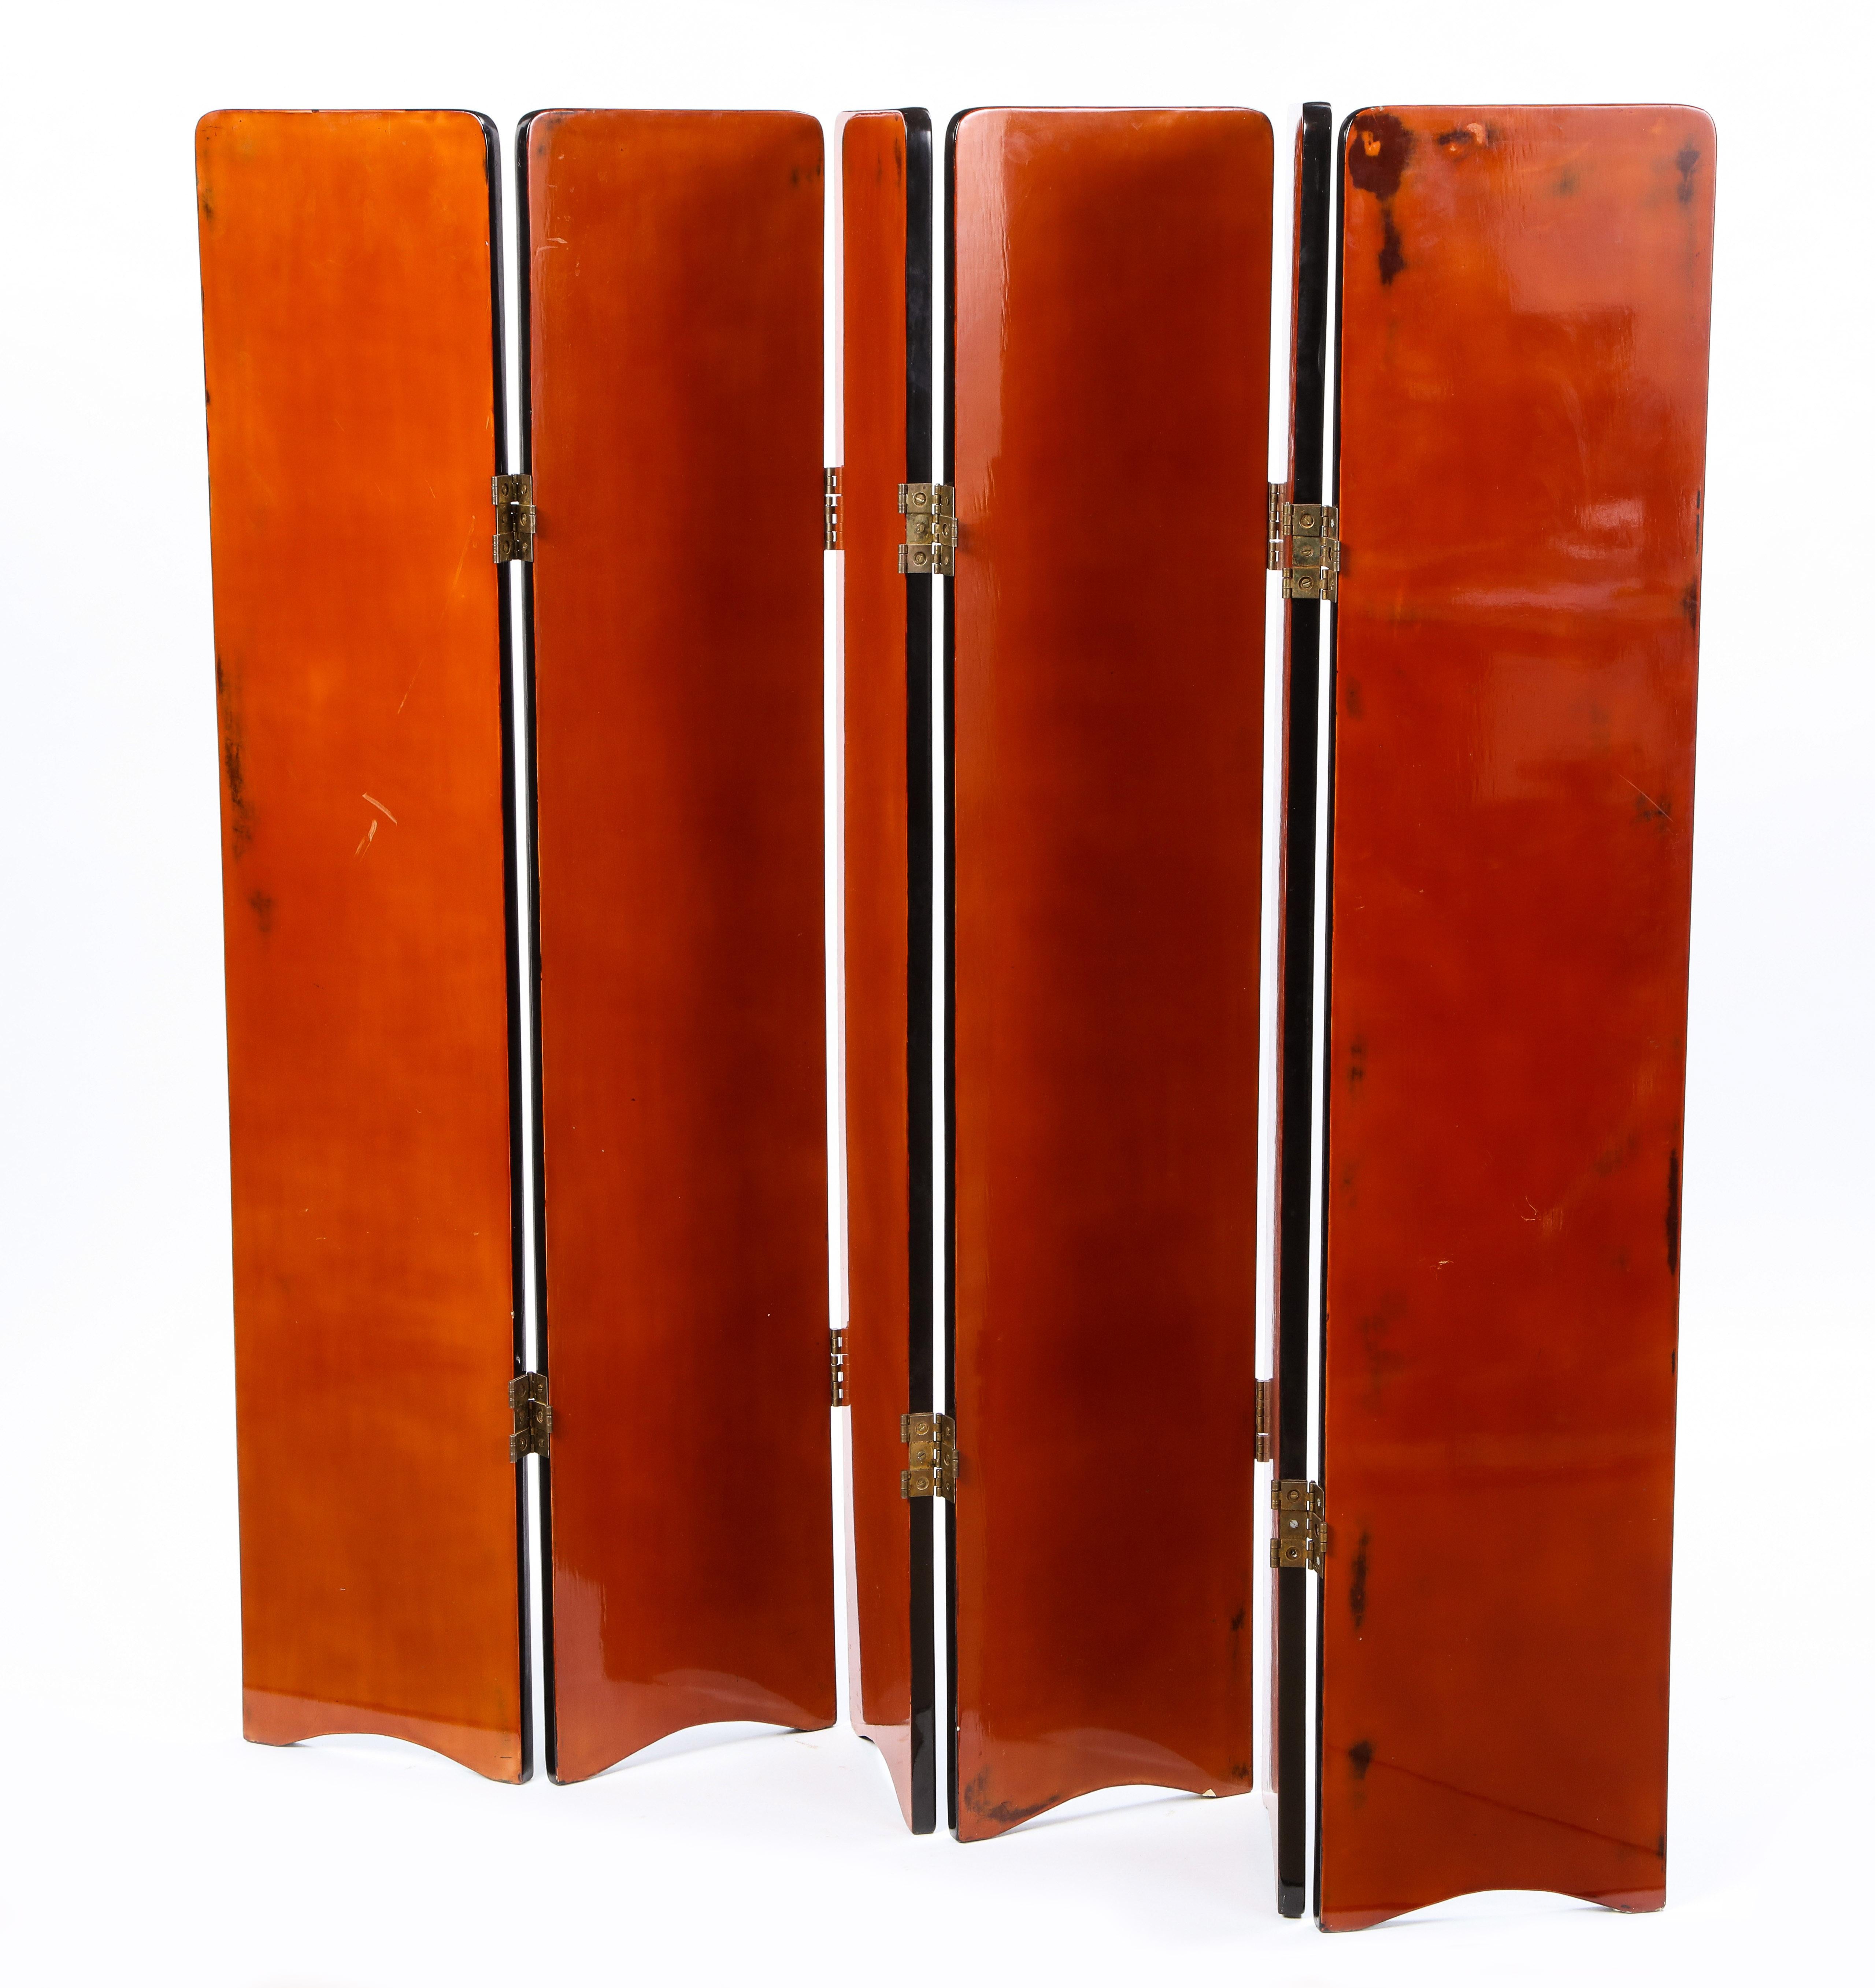 This vibrant red and black lacquered modern screen serves a multi-functional need for any home. Whether decorative or functional, this six-paneled screen with gold-tone metal hinges is an ideal room divider for a Manhattan apartment or dressing